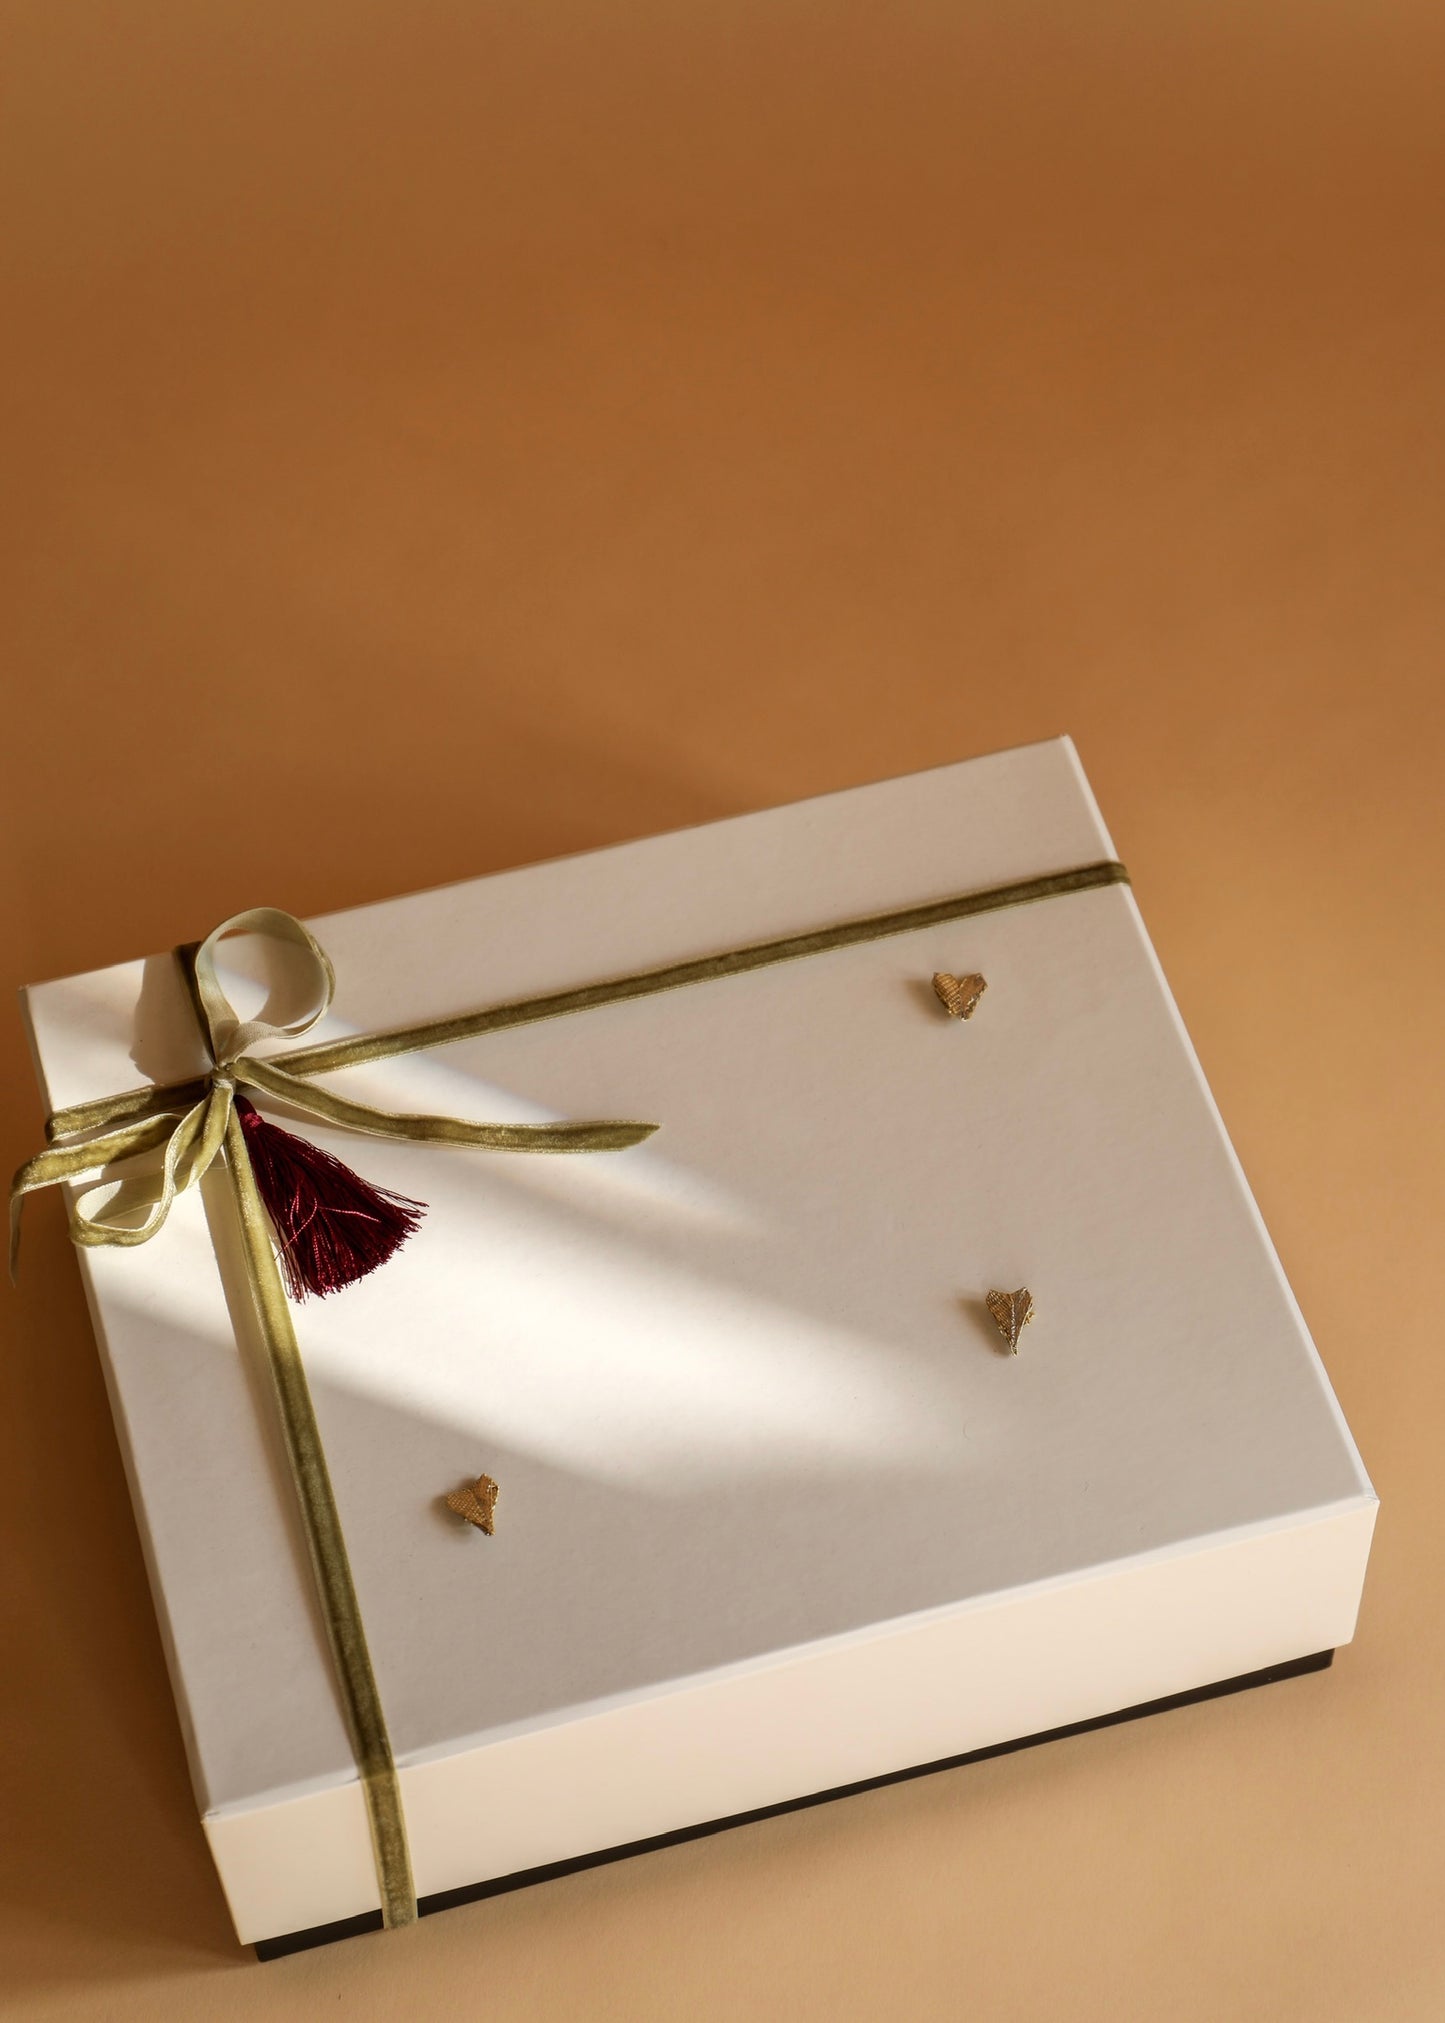 This beautiful gift box features traditional decorations to make your gift memorable. Its empty interior offers endless possibilities, allowing you to customize your special present. Give an unforgettable gift with this stunning gift box.